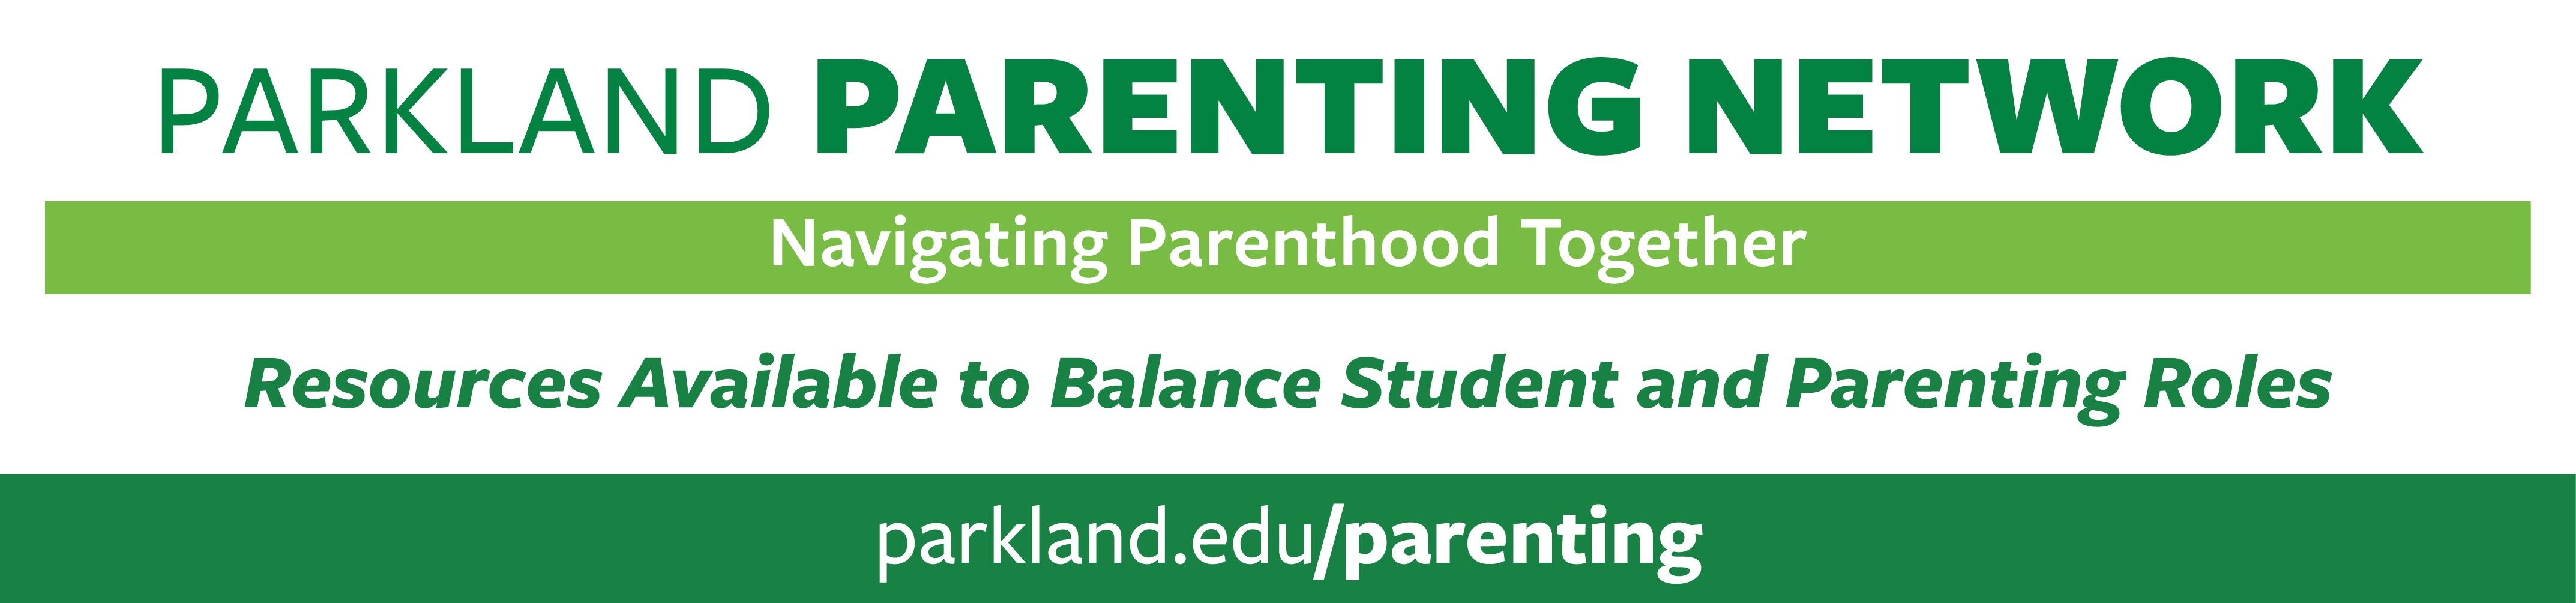 Parkland Parenting Network: Nacigating Parenthood Together. Resources Available to Balance Student and Parenting Roles.